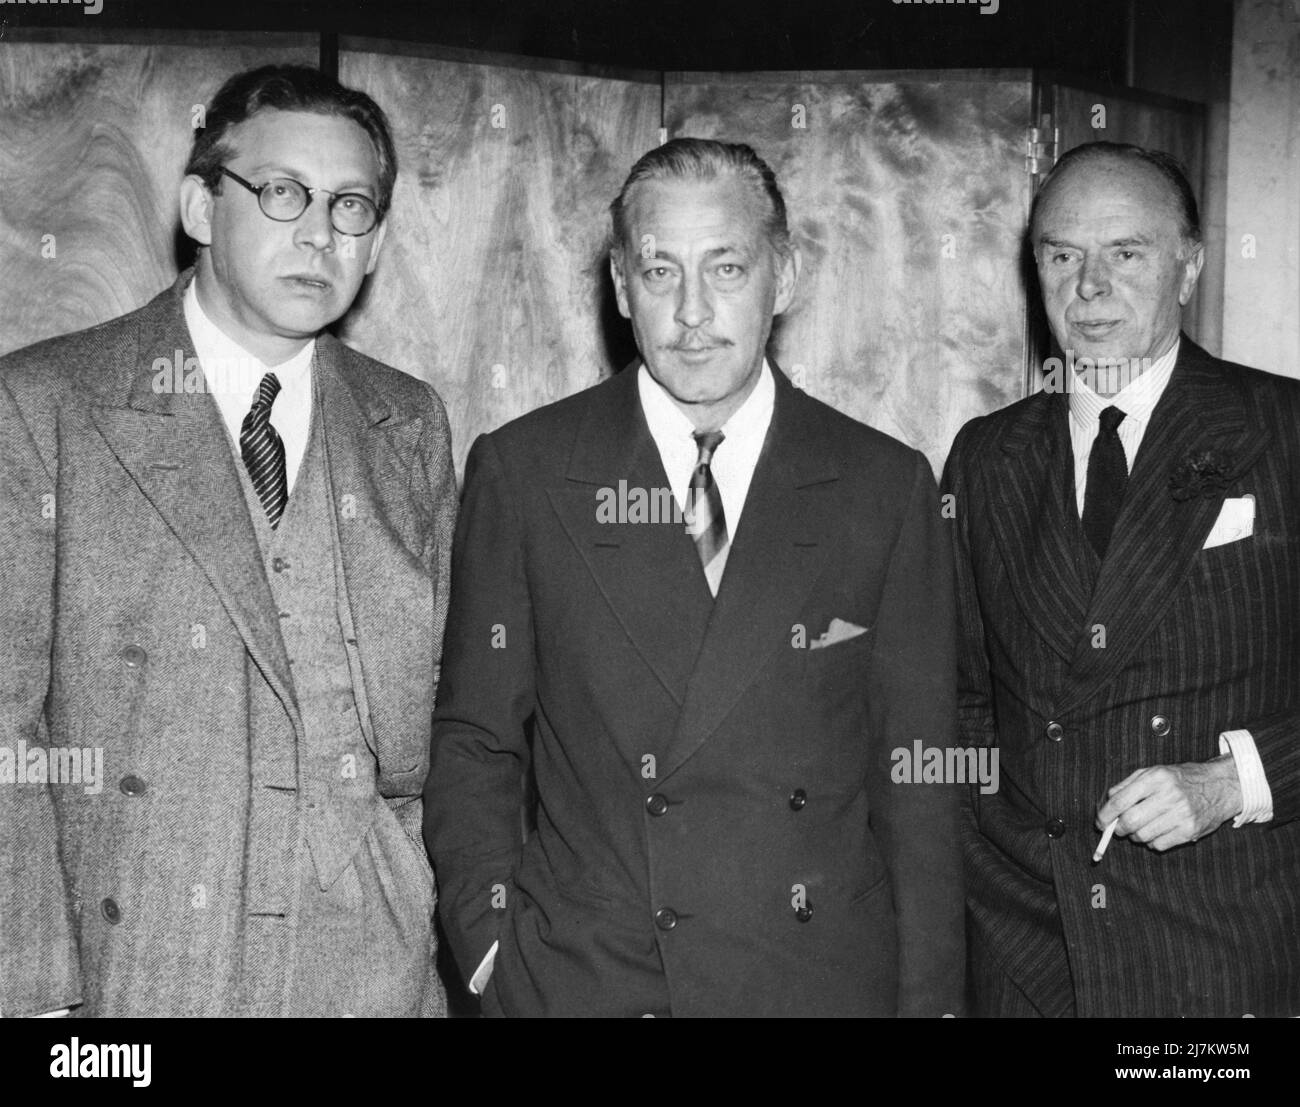 Producer ALEXANDER KORDA JOHN BARRYMORE and Chairman of London Films GEORGE GROSSMITH in London in September 1934 when Barrymore was set to play the scientist in H.G. Wells ' THINGS TO COME which never occurred while Barrymore also made Colour tests as Hamlet at the time for another finally unrealised project Stock Photo